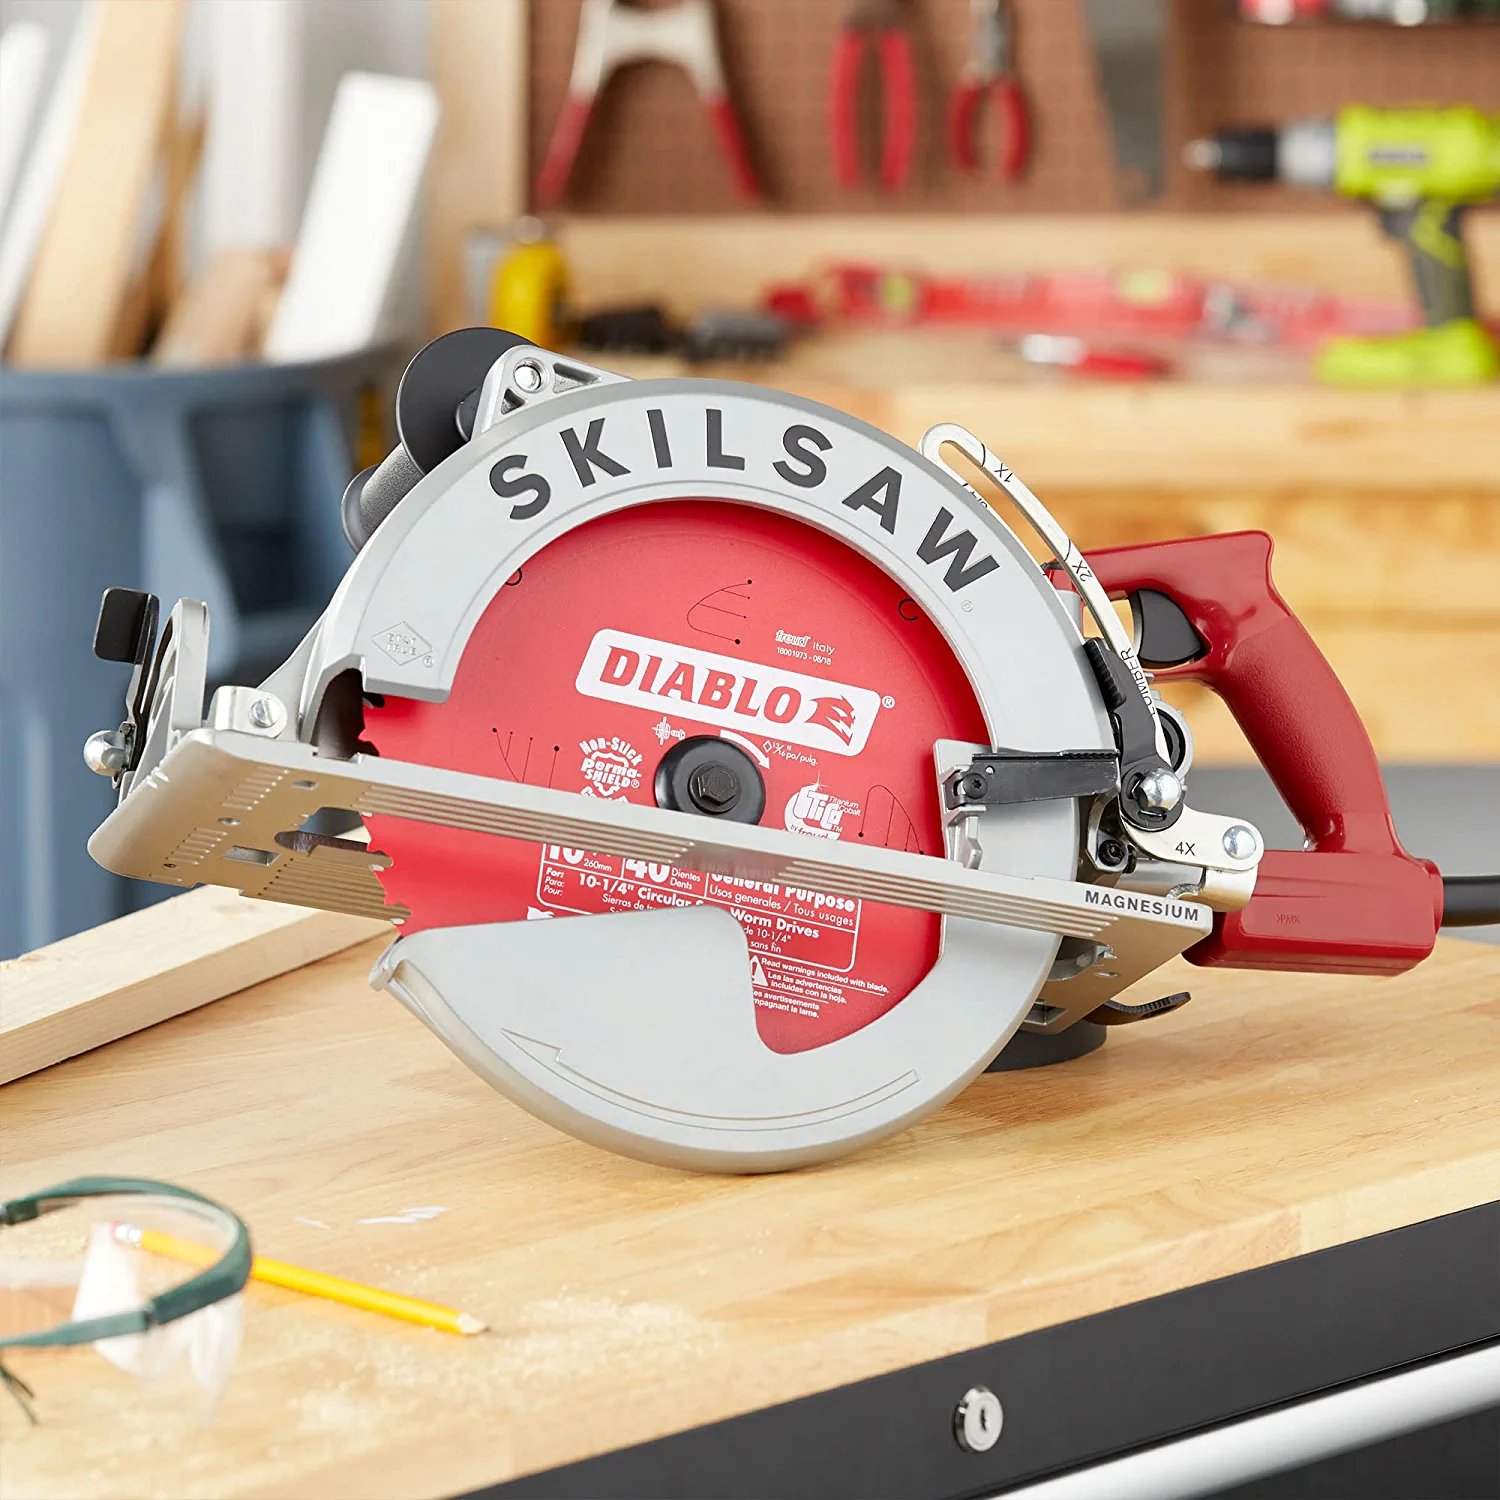 Skilsaw Magnesium Sawsquatch Worm Drive Circular Saw 10 1/4in. 15 Amp,  with Electric Brake, Model Number SPT70WM-22